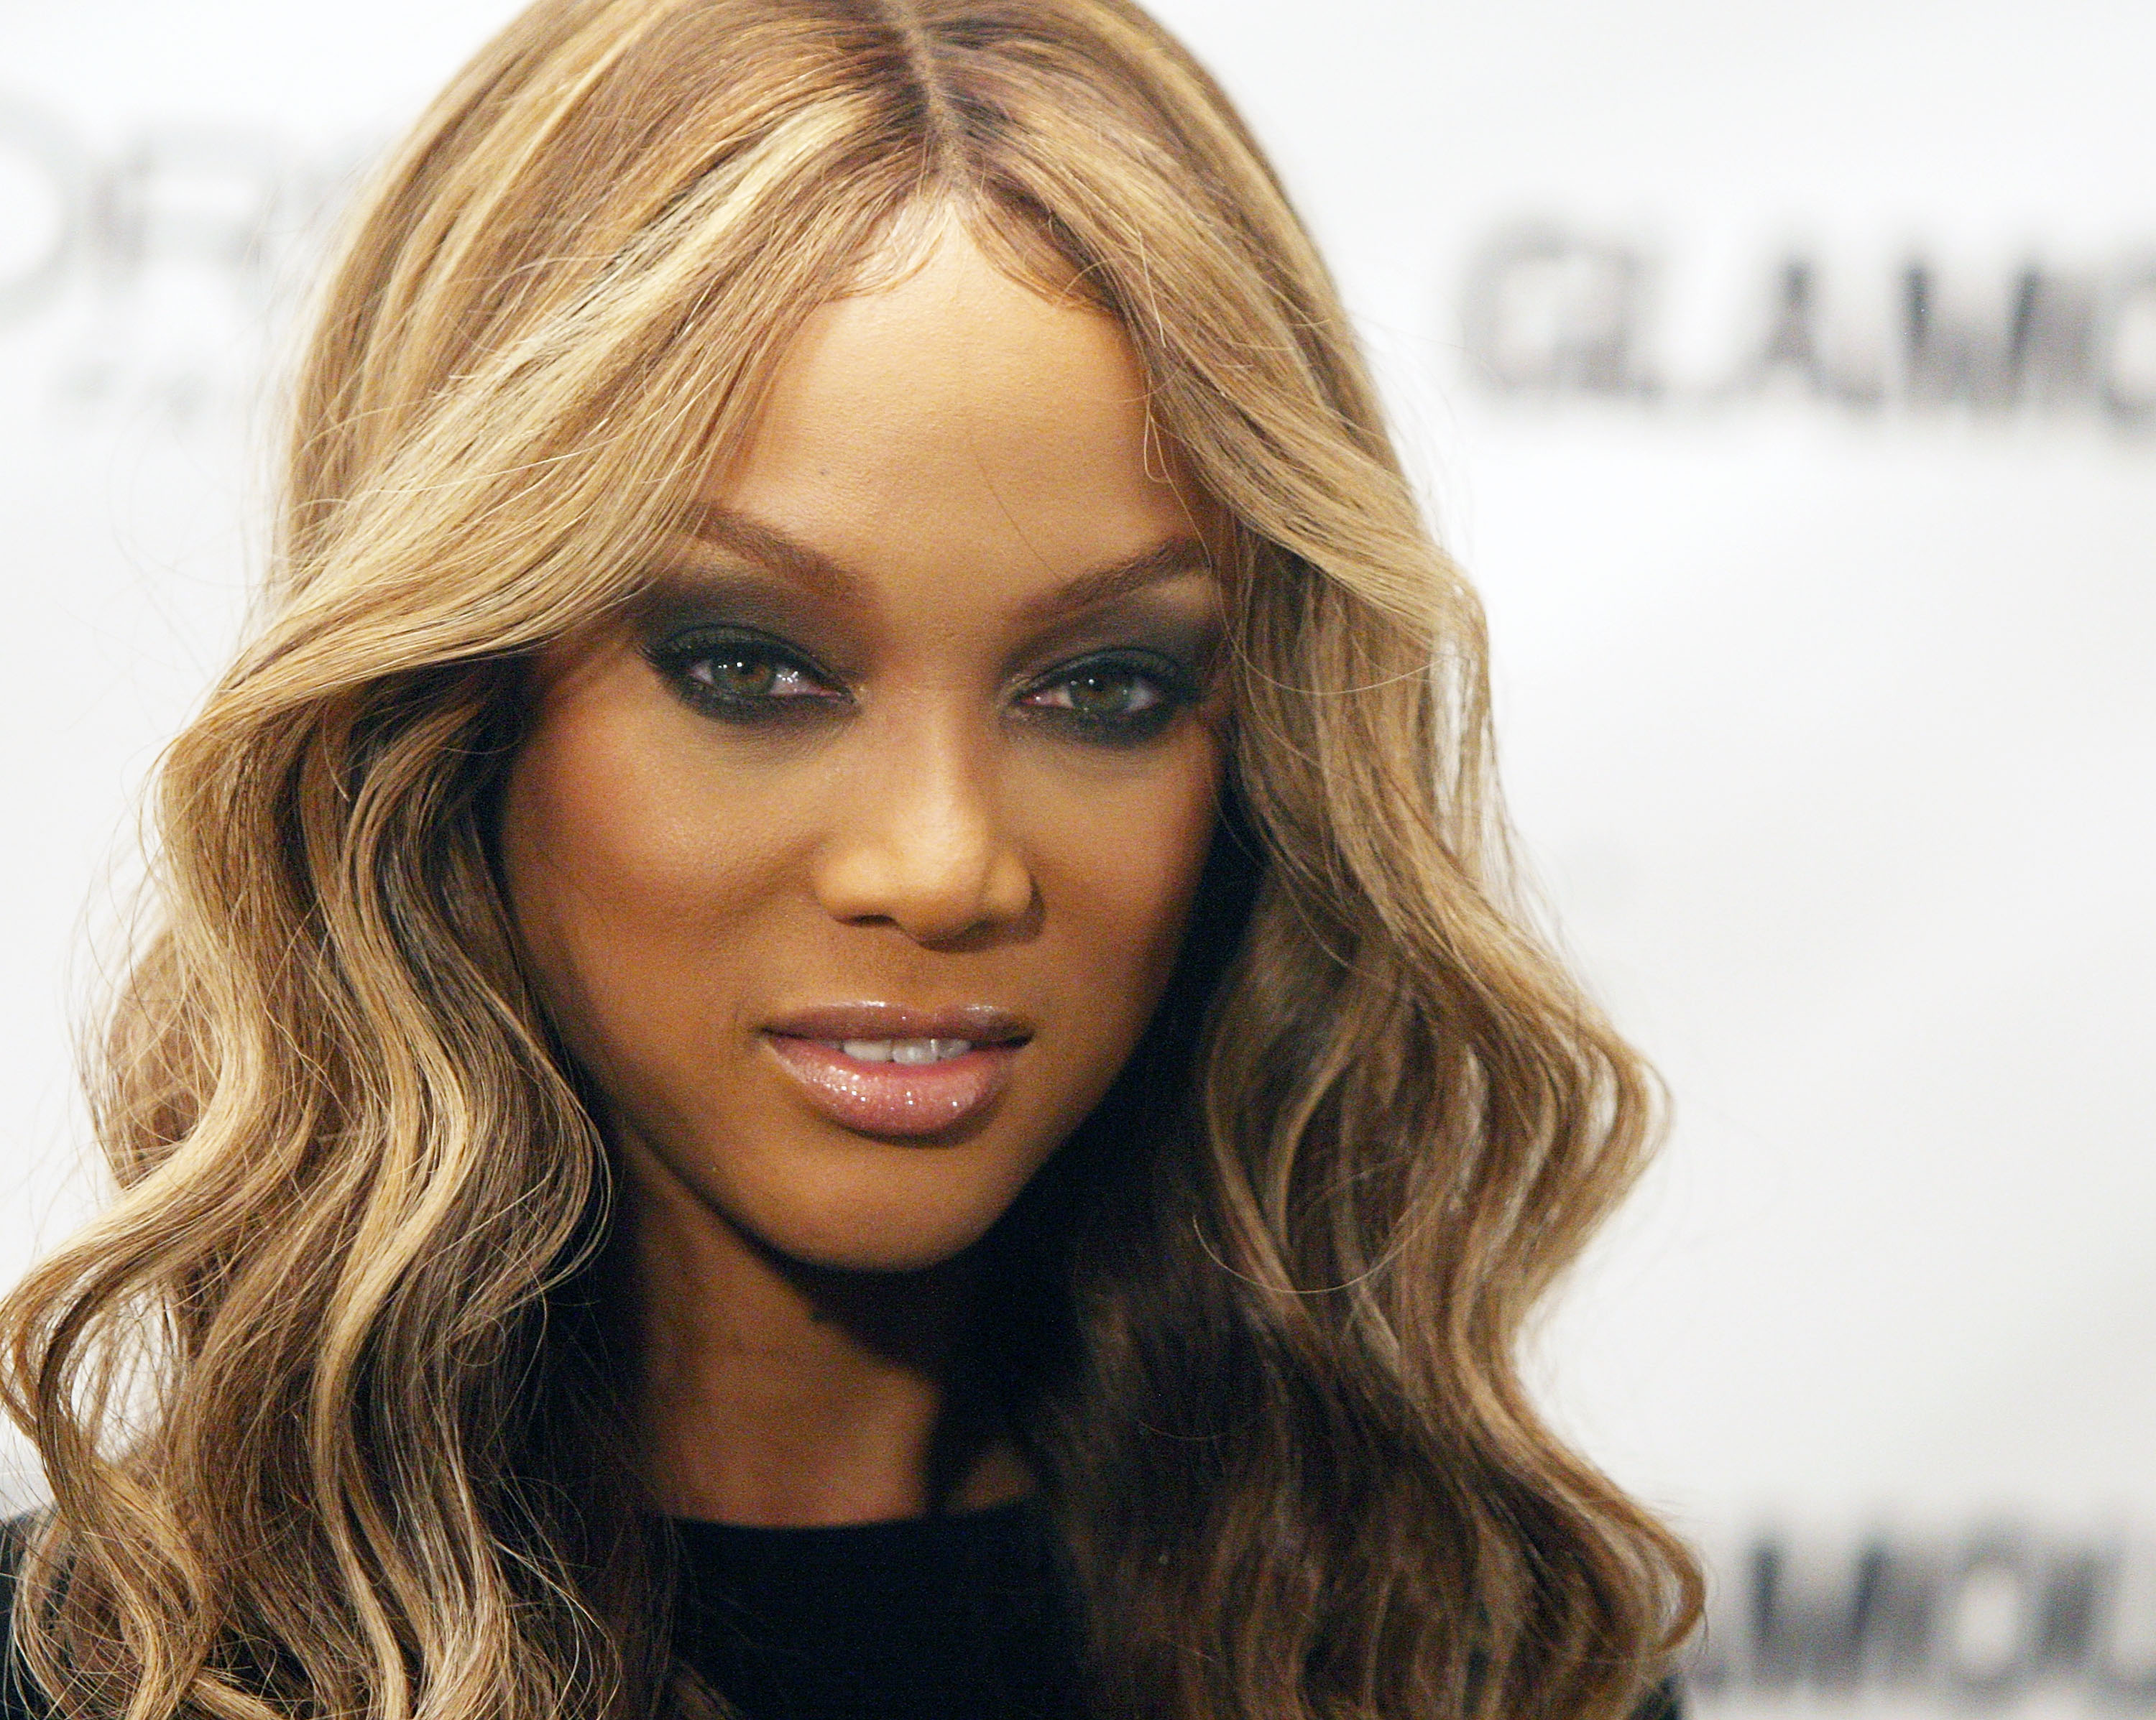 With $90 Million Net Worth, Tyra Banks Still Has A Surprisingly